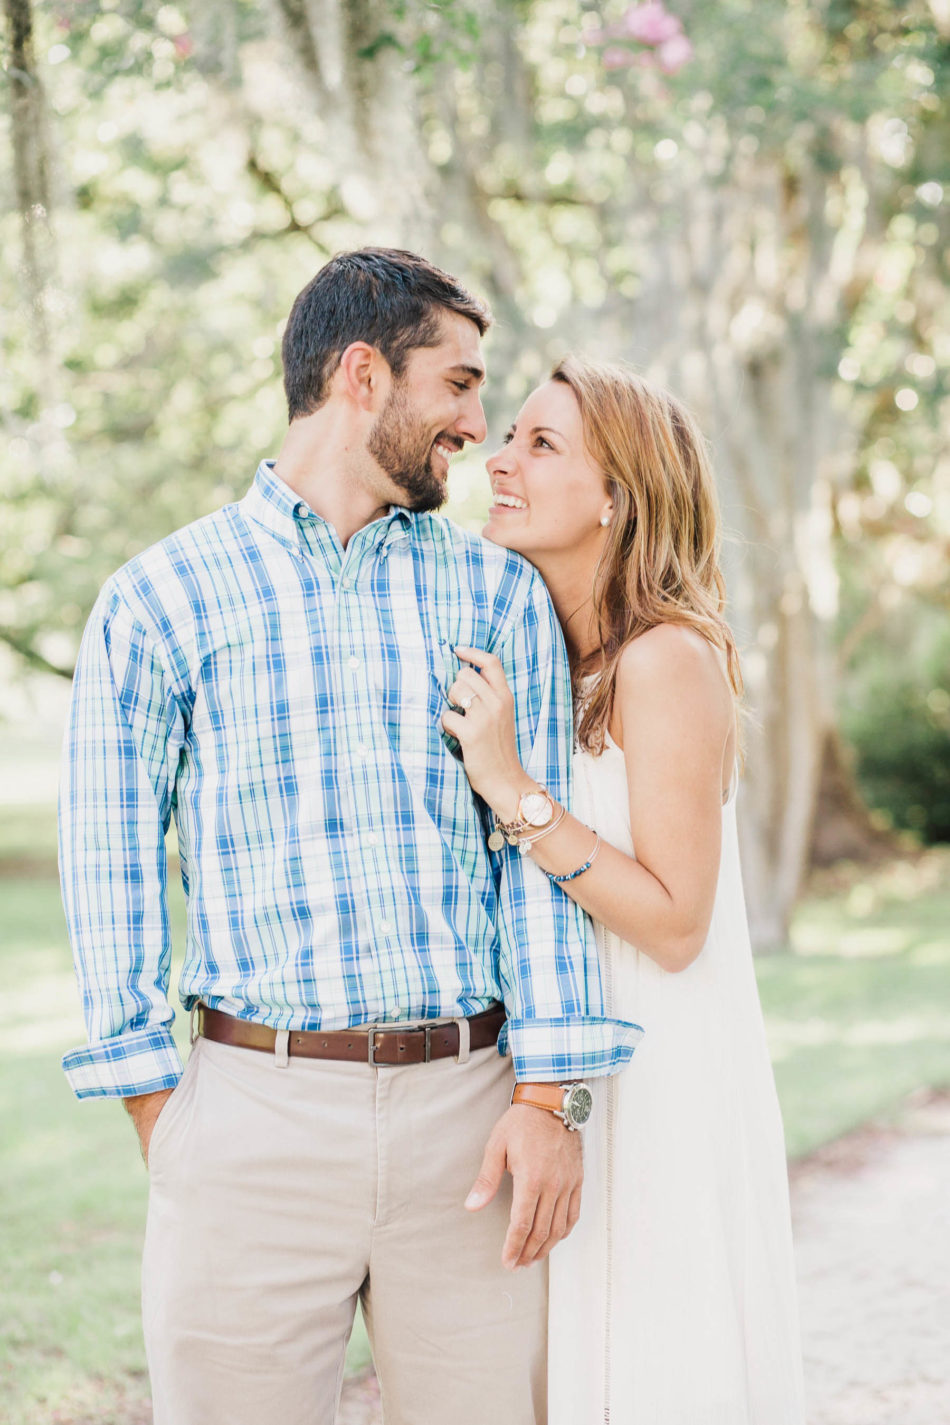 Engaged couple stands in clearing with spanish moss covered trees all around, Hampton Park, Charleston, South Carolina Kate Timbers Photography. http://katetimbers.com #katetimbersphotography // Charleston Photography // Inspiration